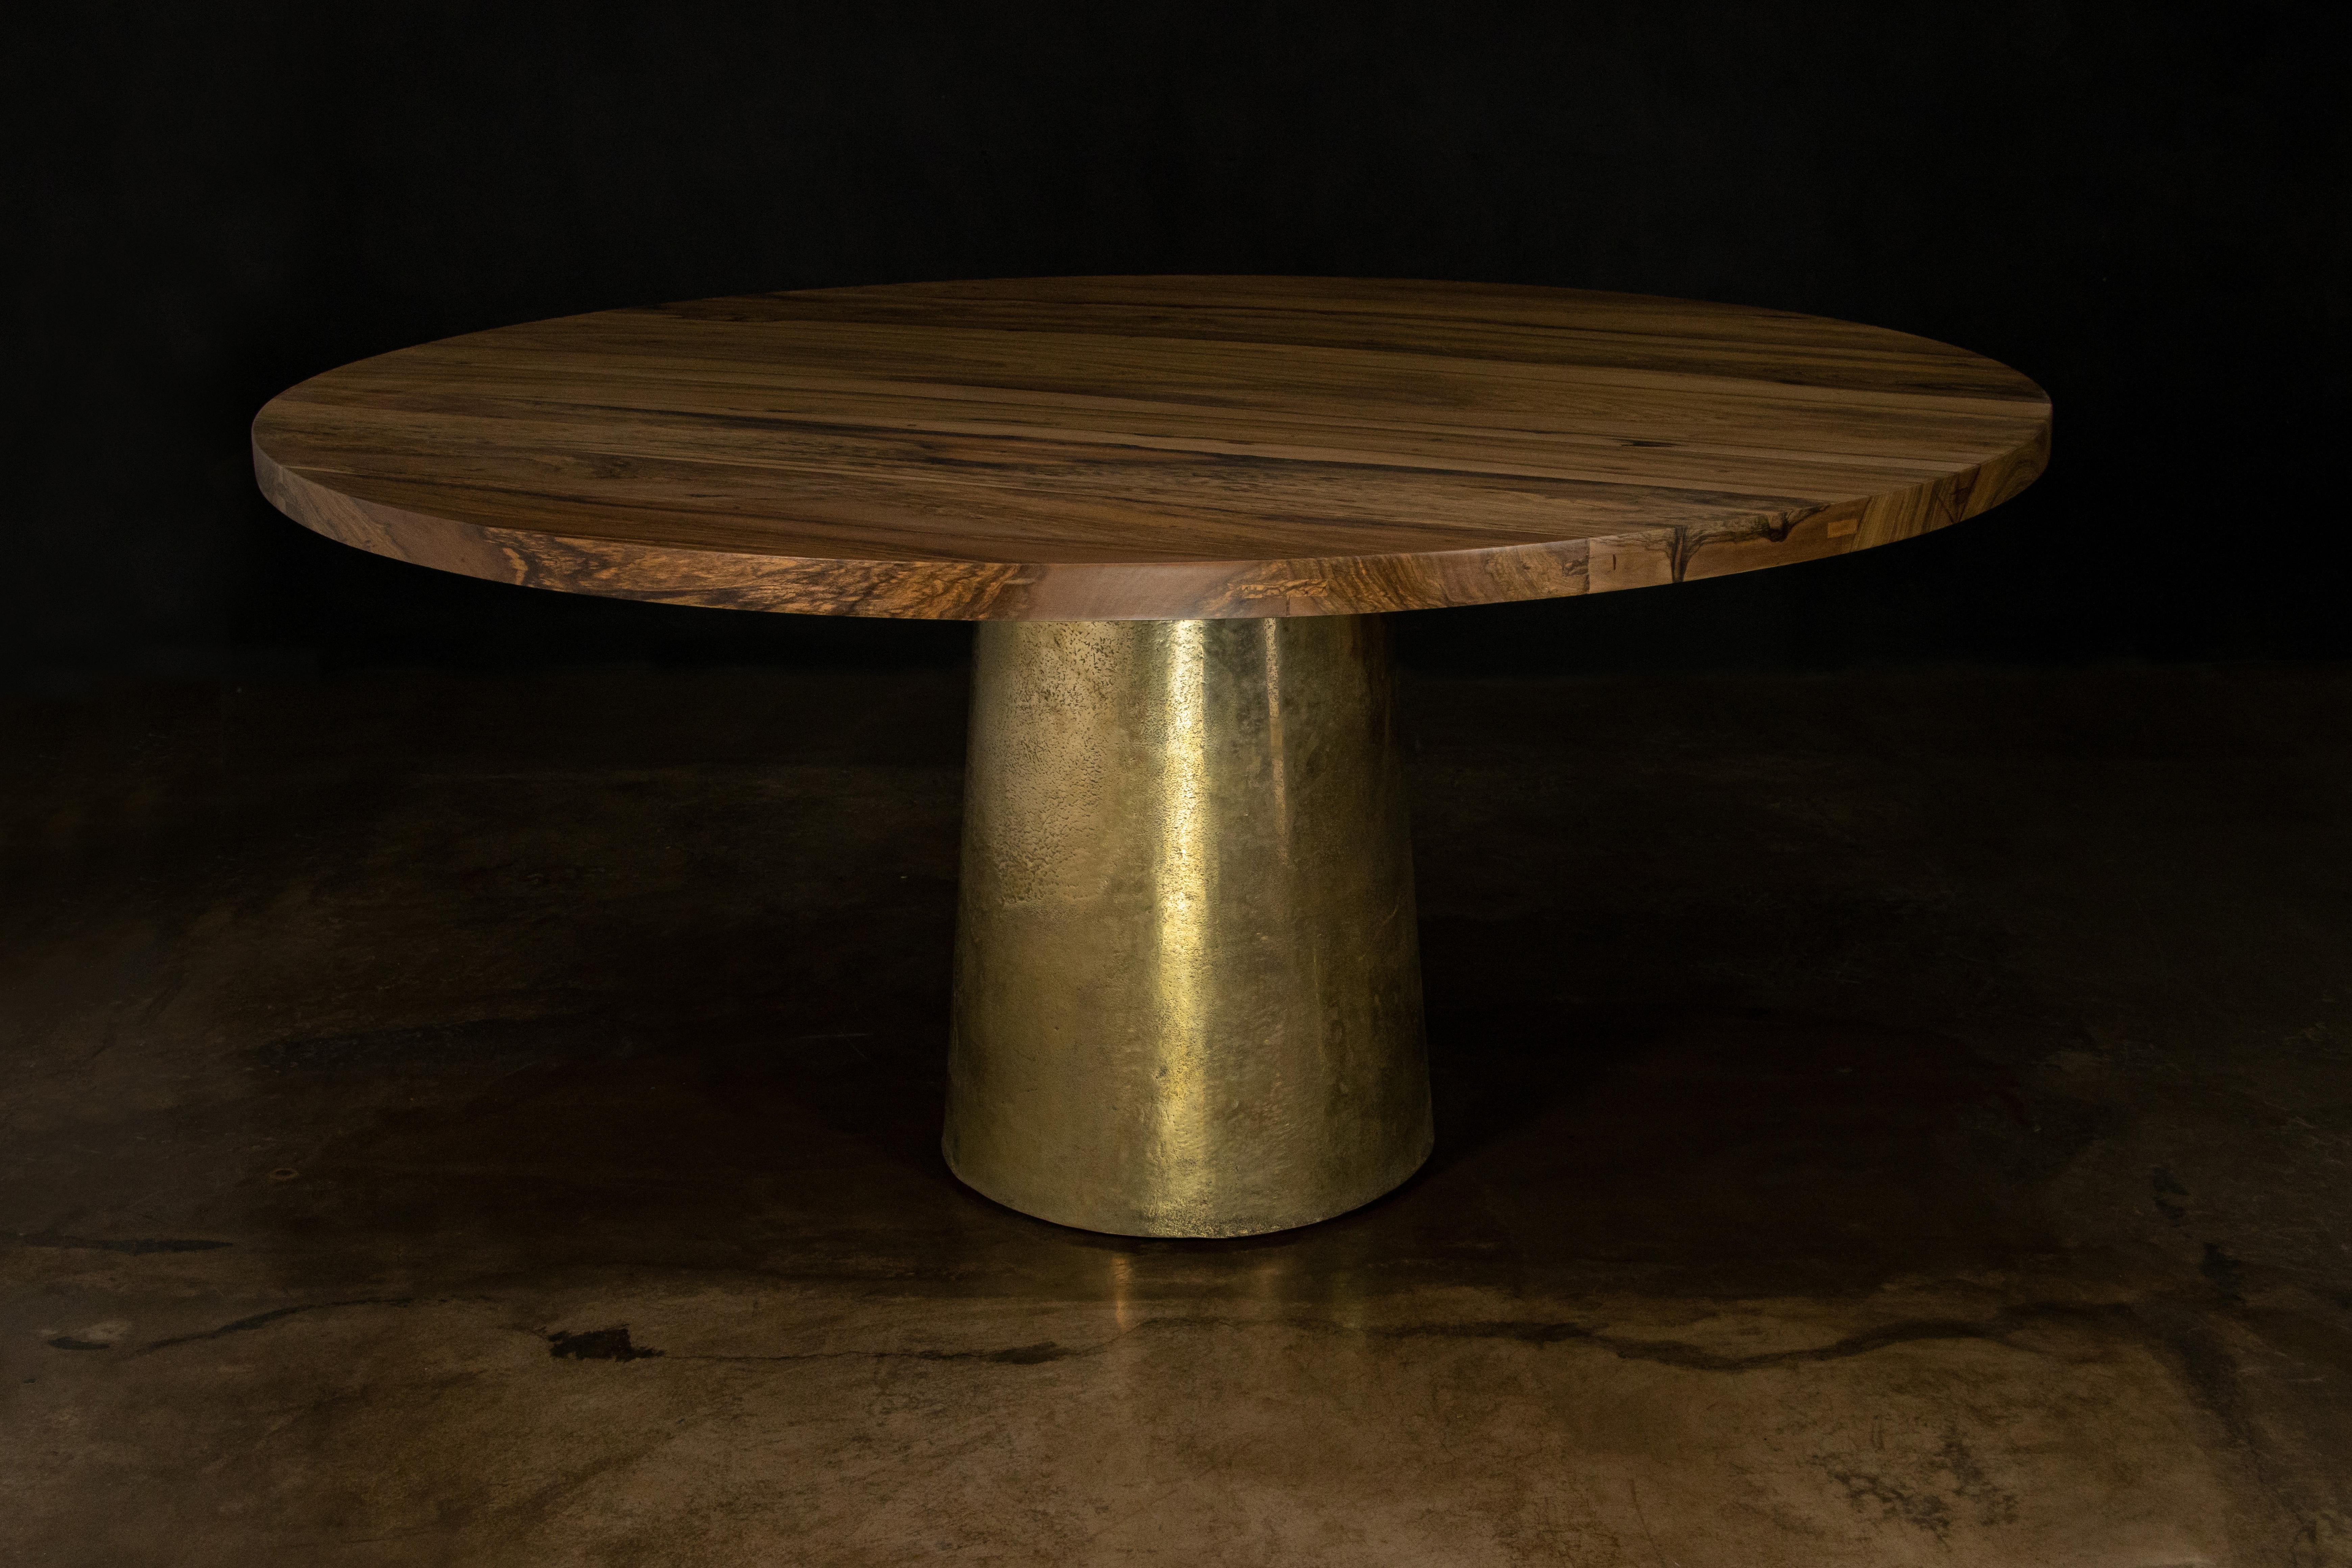 Benino Round Exotic Wood Cast Bronze Pedestal Dining Table by Costantini Design 

60